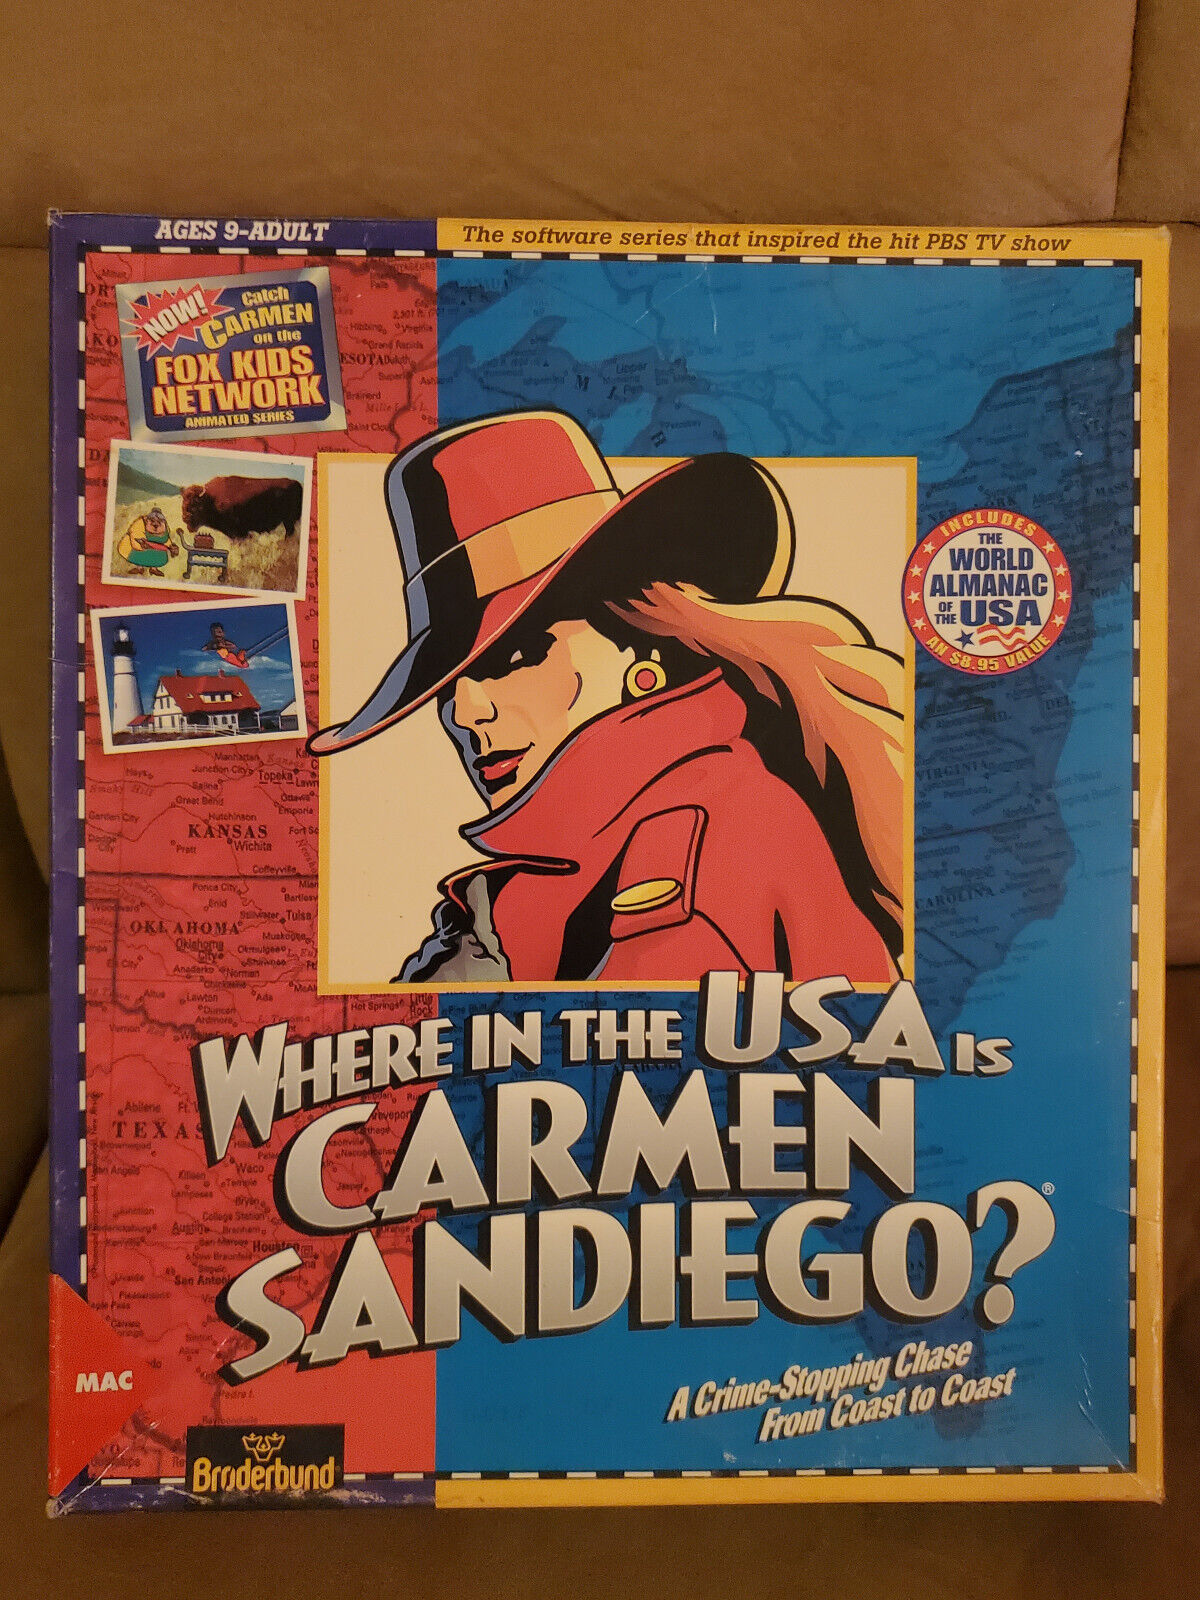 Where In The USA is Carmen Sandiego software for Macintosh